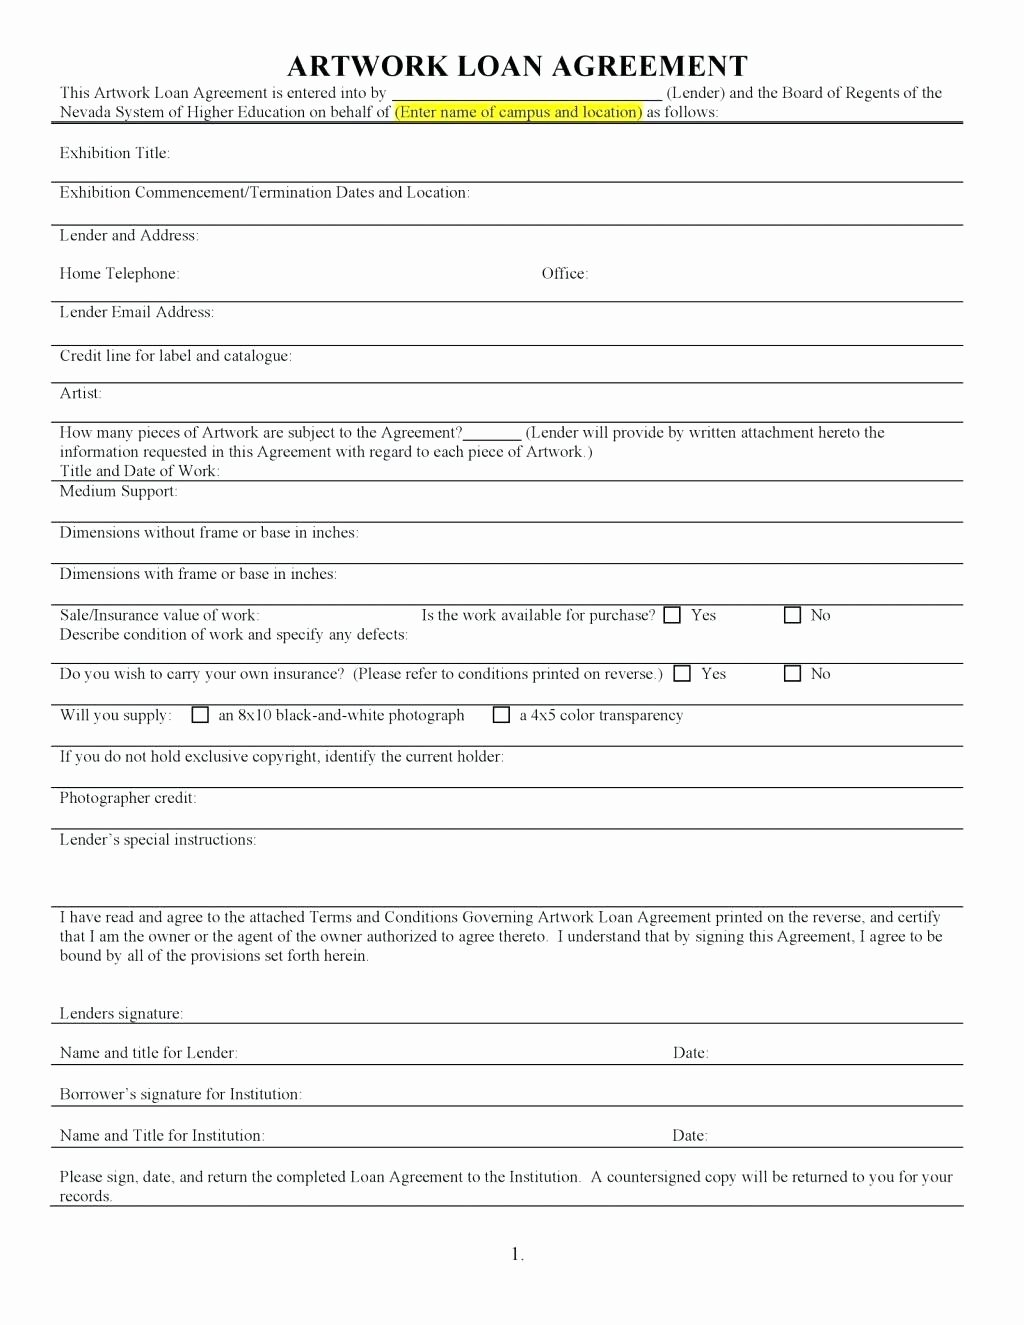 small loan agreement template